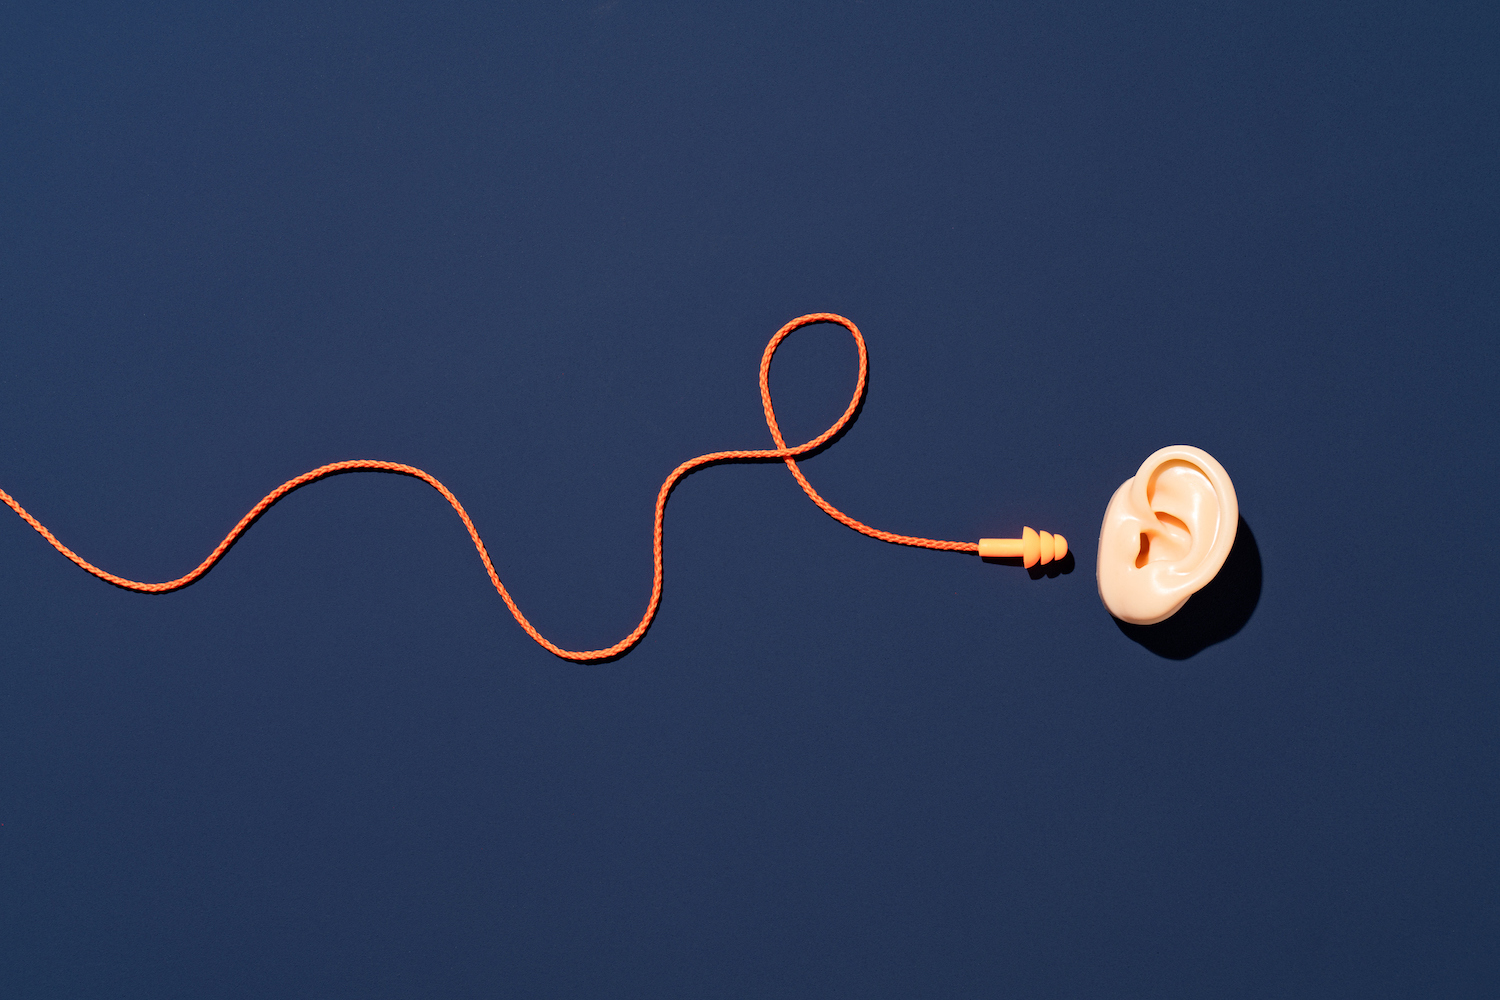 Curved Drawstring Orange Earplugs Reach Ear on Blue Background Directly Above View.  4 tips for RevOps teams to filter out noise and focus on the big picture